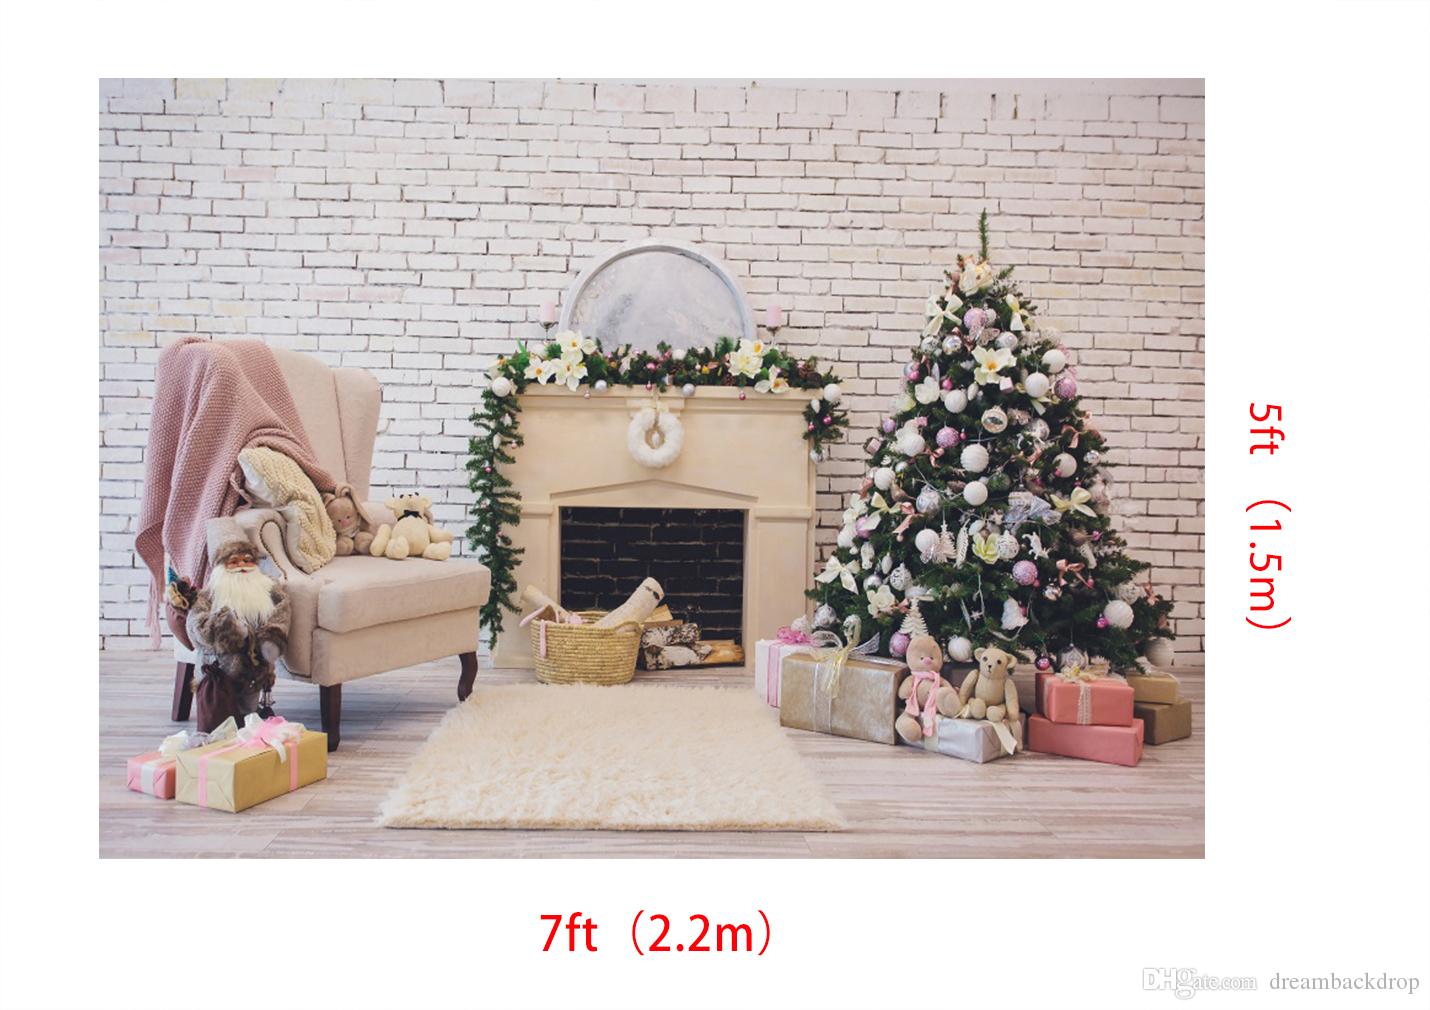 Fireplace Ideas Wood Inspirational 2020 Dream 7x5ft Christmas Interior Fireplace Decor Backdrop Colorful Christmas Tree Brick Wall Shoot Background for Booth Studio Prop From